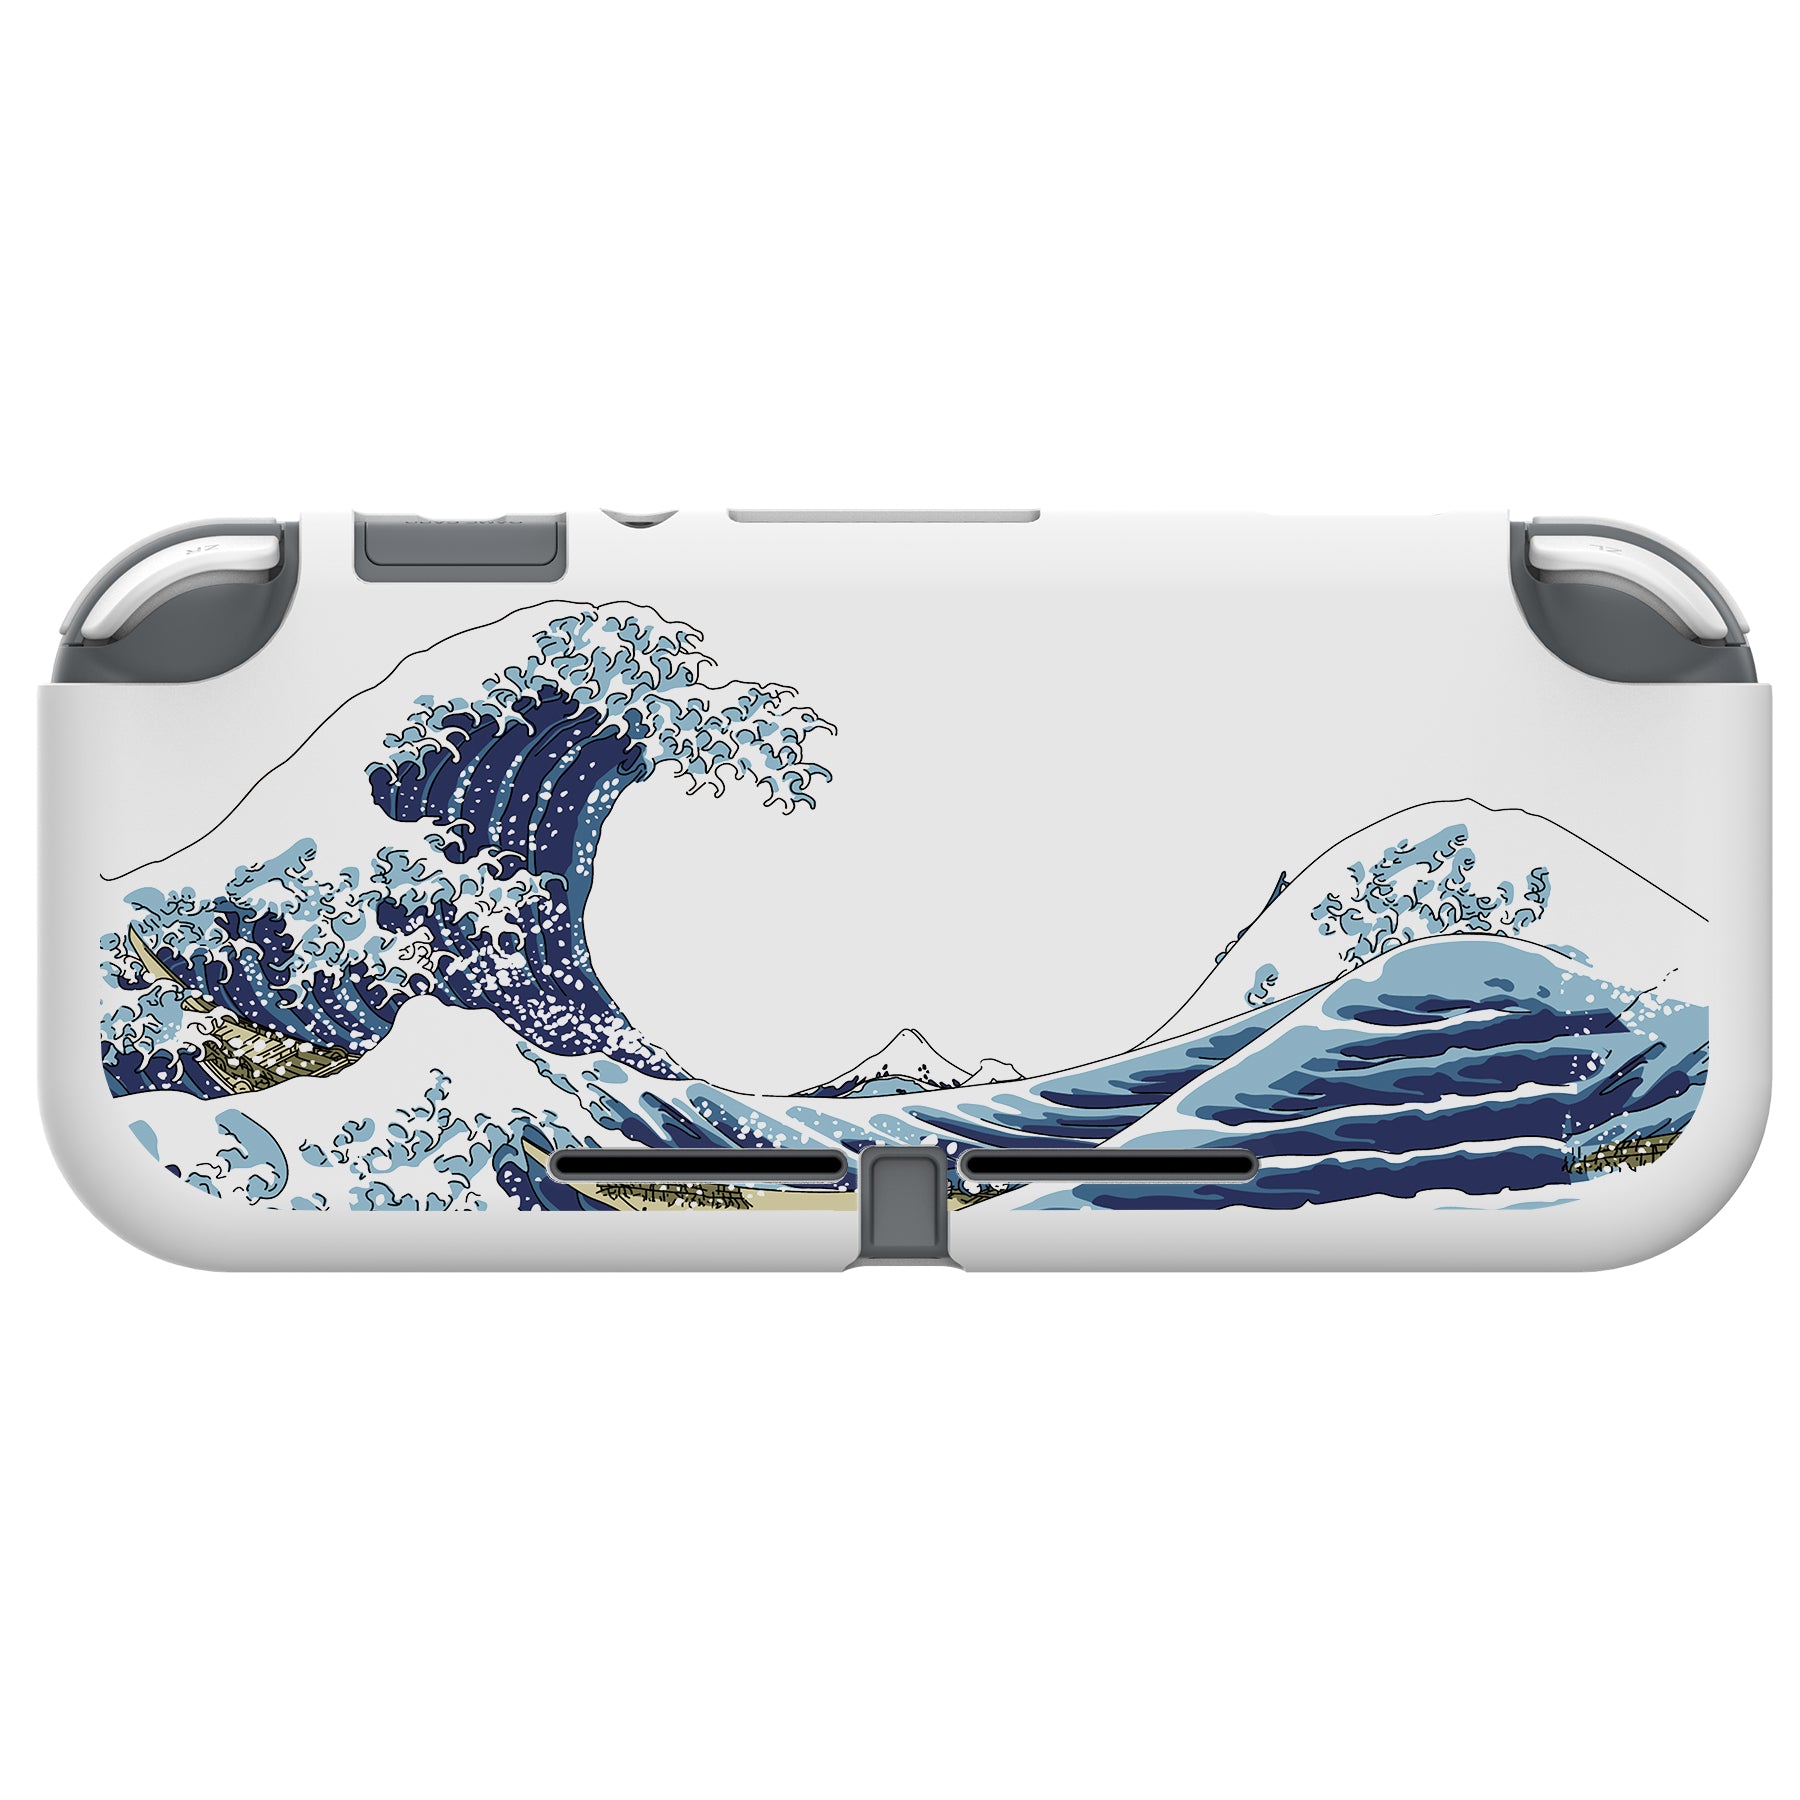 PlayVital The Great Wave Custom Protective Case for Nintendo Switch Lite, Soft TPU Slim Case Cover for Nintendo Switch Lite- LTU6017 PlayVital